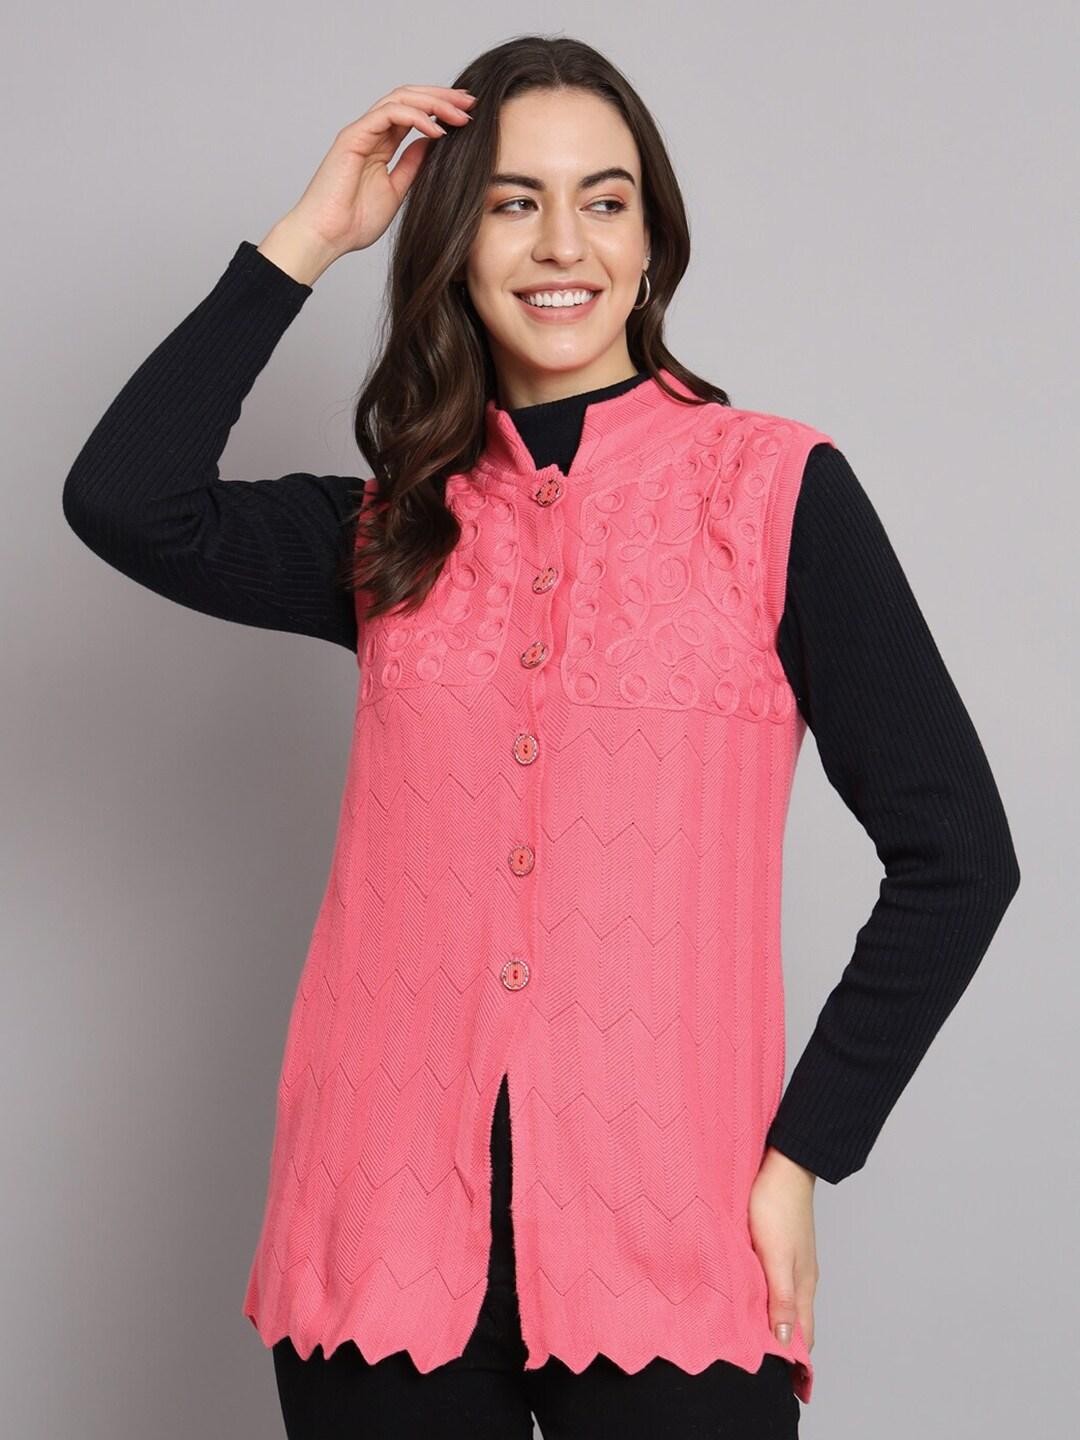 ewools embroidered pure woollen cardigan